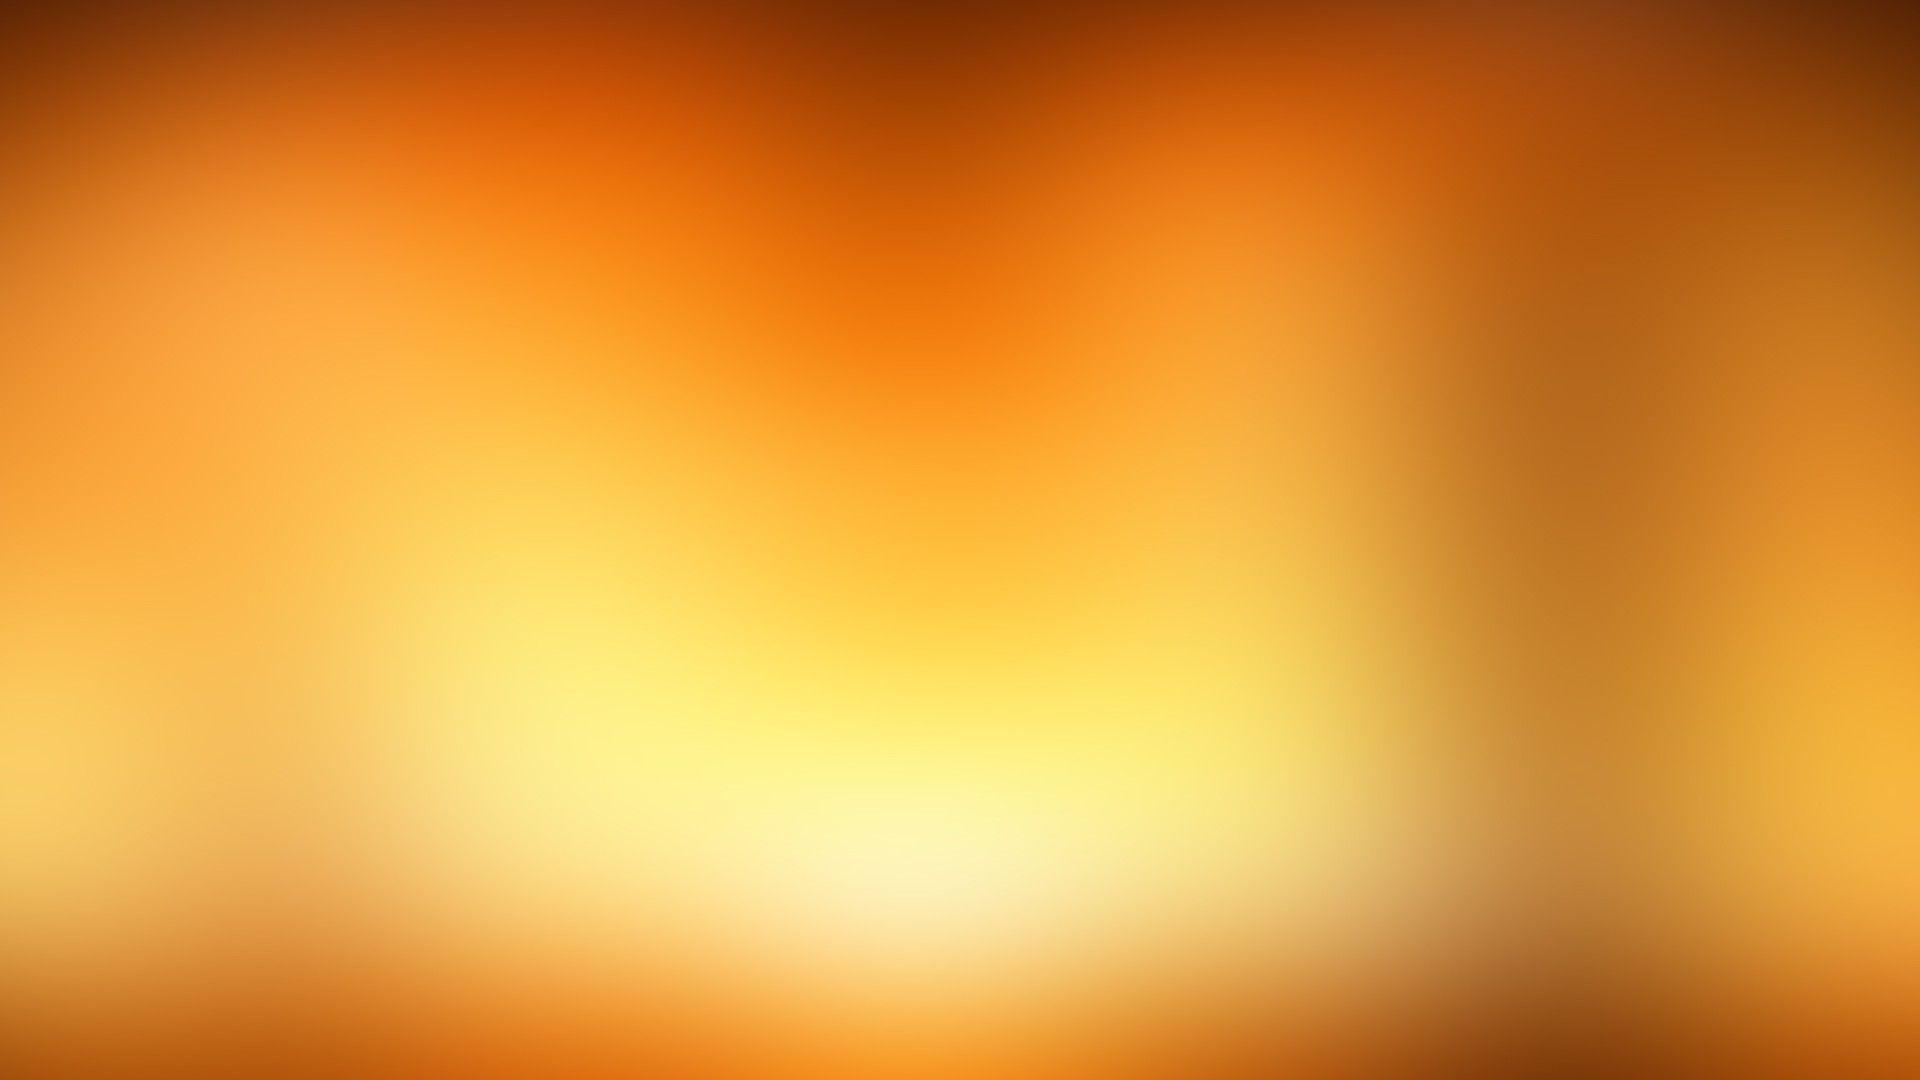 Gold Gradient Wallpapers - Top Free Gold Gradient Backgrounds ...